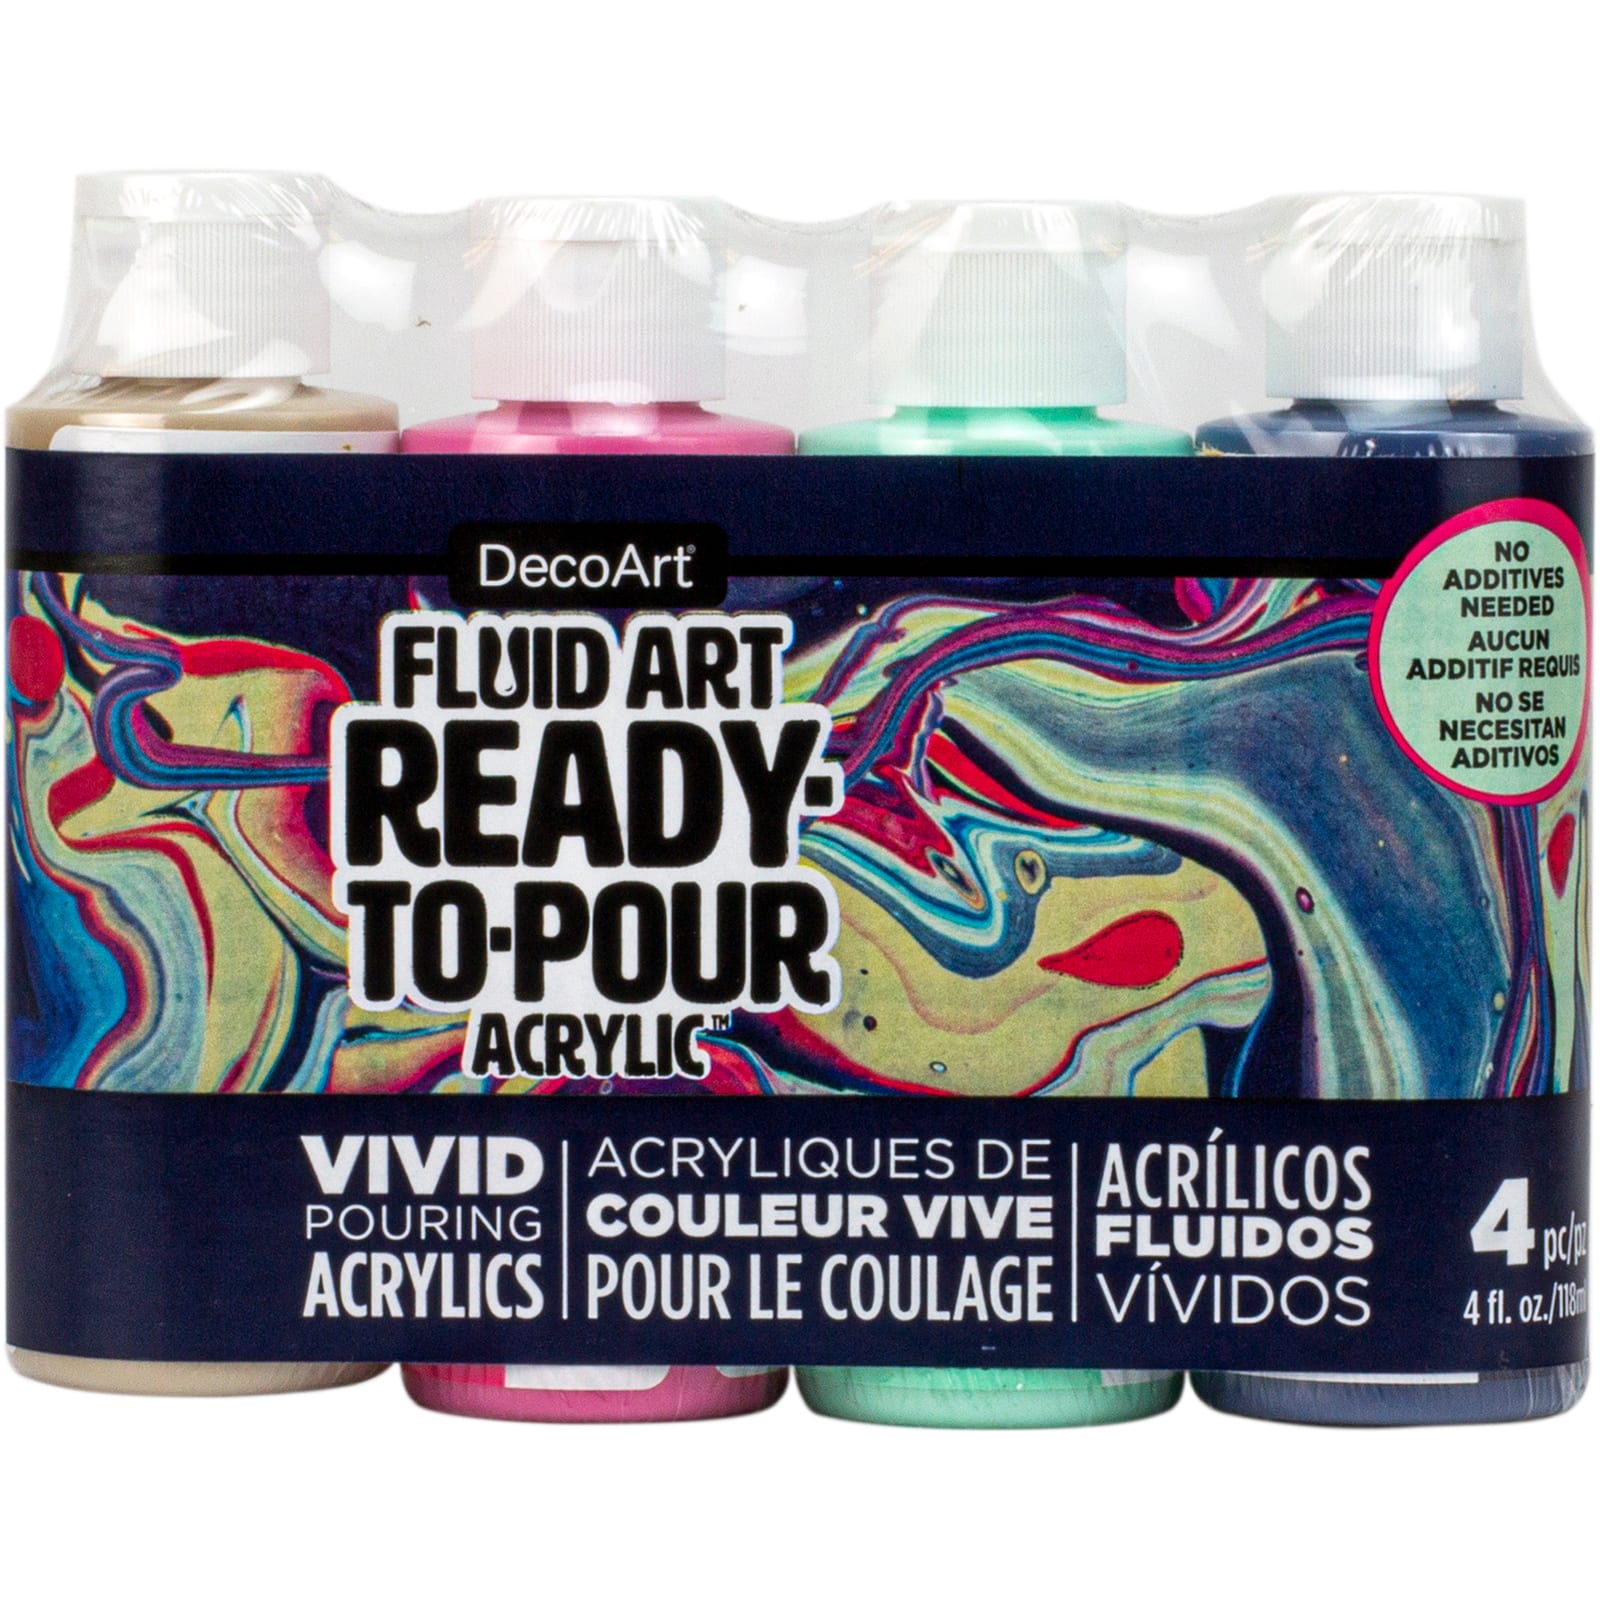 6 Packs: 4 ct. (24 total) DecoArt&#xAE; Fluid Art Ready-to-Pour Acrylic&#x2122; Carnival